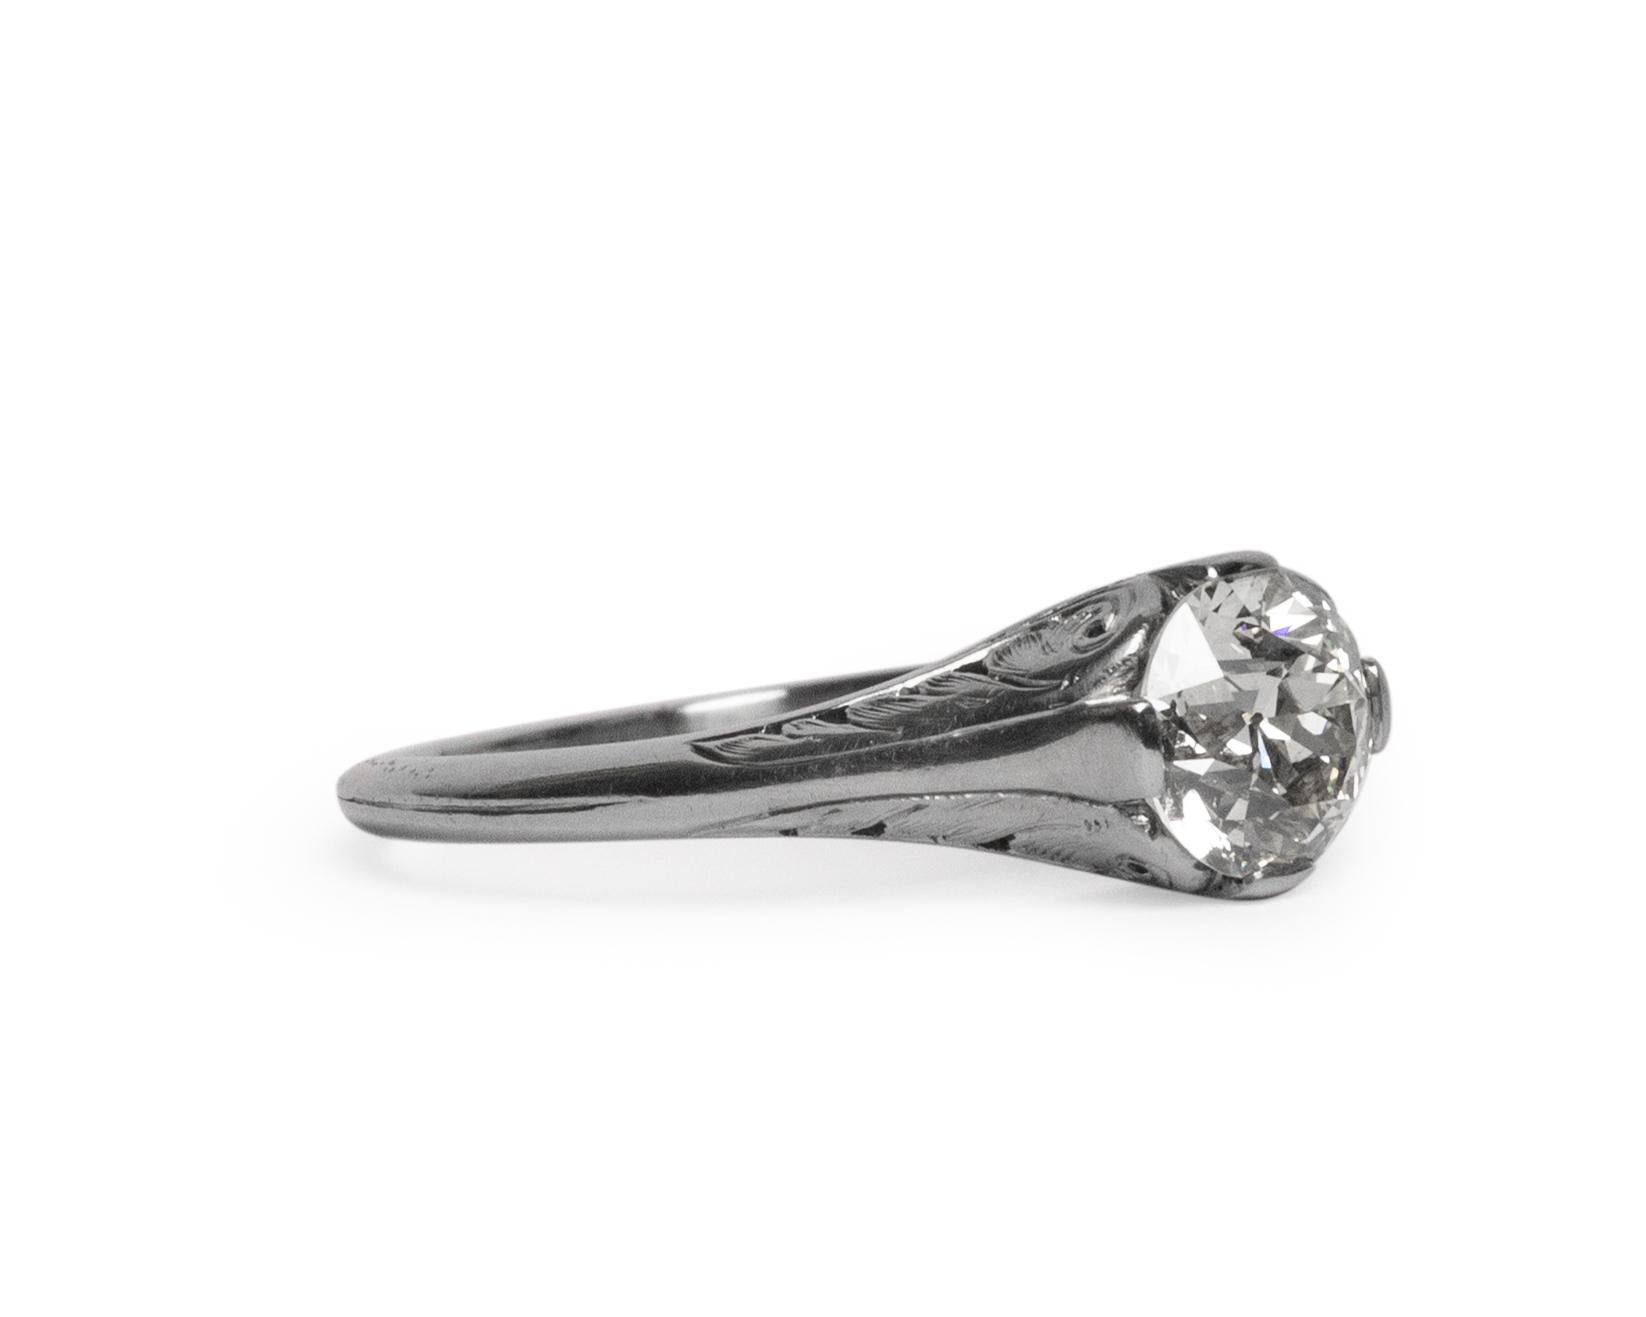 Ring Size: 7.5
Metal Type: Platinum  [Hallmarked, and Tested]
Weight: 4.7  grams

Center Diamond Details:
GIA REPORT #:2211054397
Weight: 1.17 carat
Cut: Old European Brilliant
Color: M
Clarity: SI1

Finger to Top of Stone Measurement: